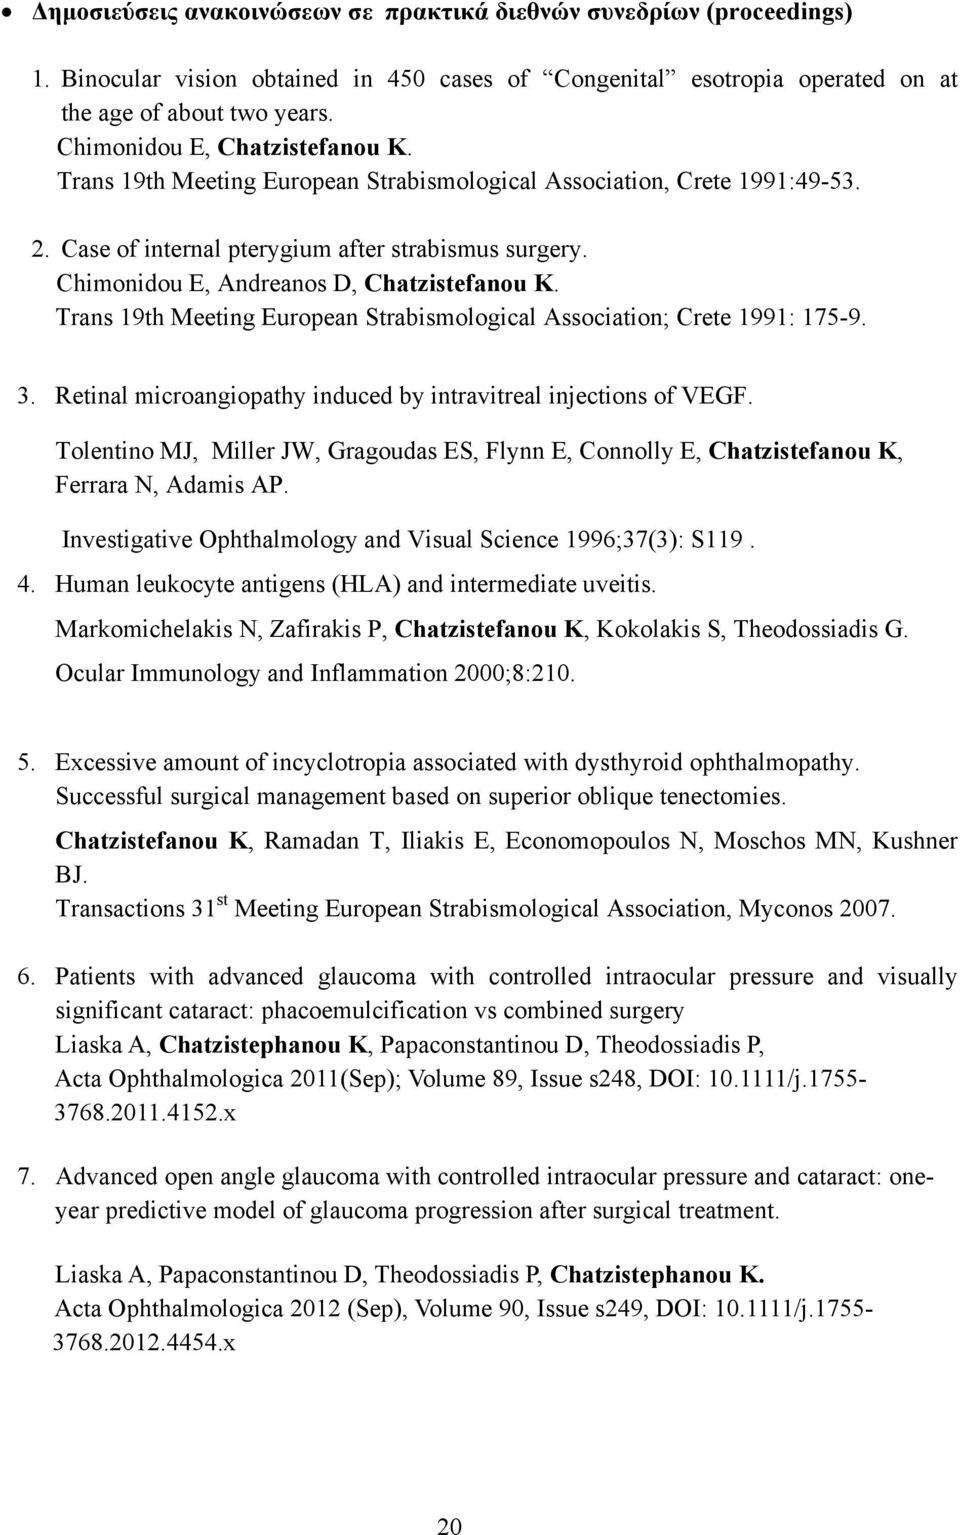 Chimonidou E, Andreanos D, Chatzistefanou K. Trans 19th Meeting European Strabismological Association; Crete 1991: 175-9. 3. Retinal microangiopathy induced by intravitreal injections of VEGF.